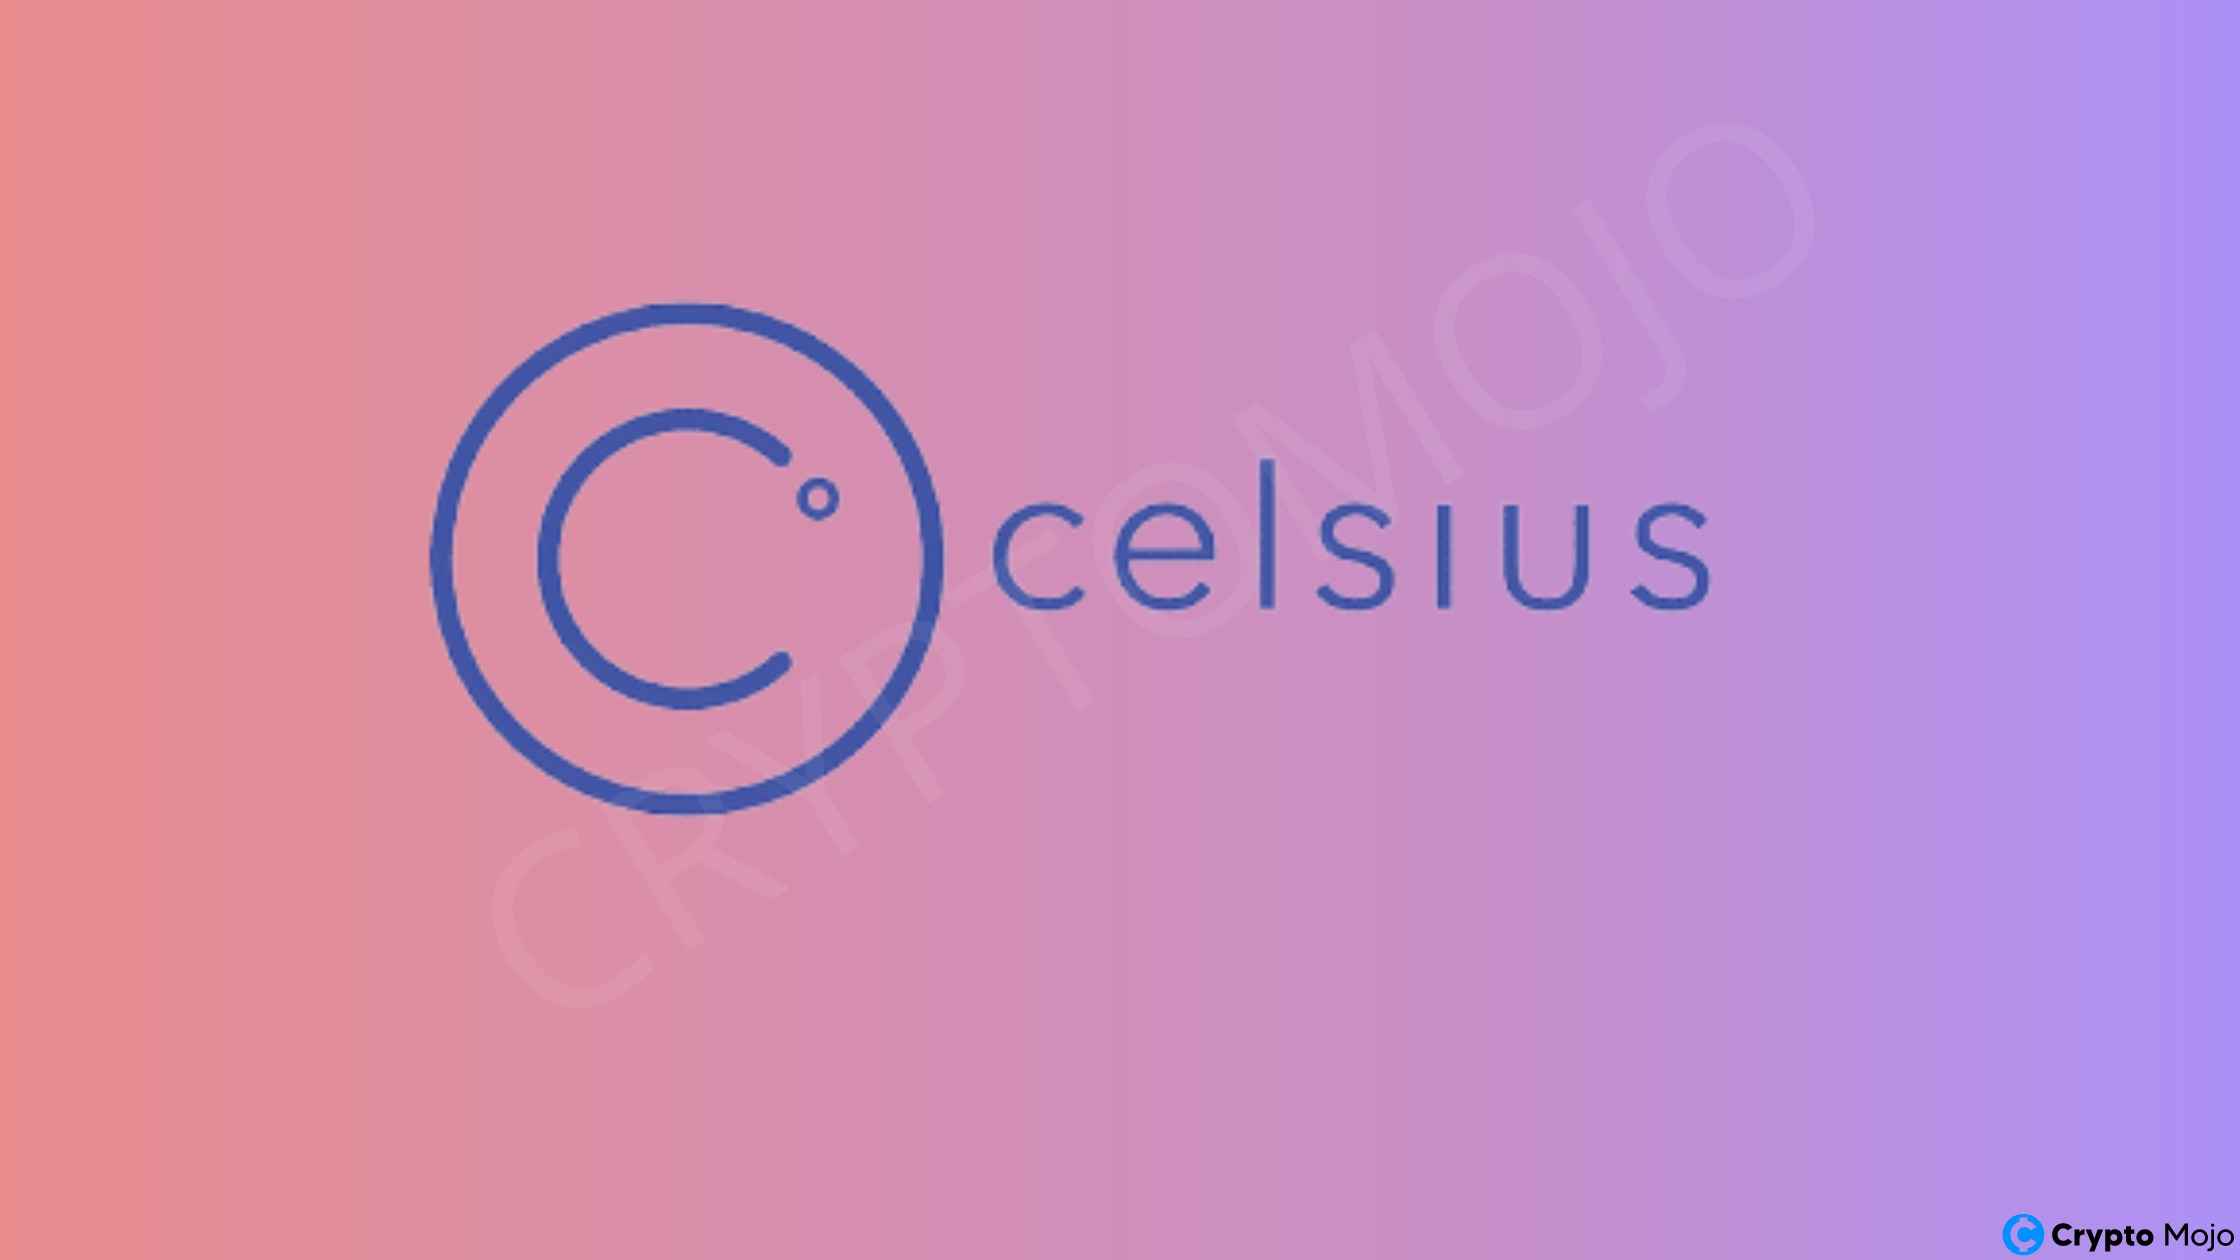 Celsius Creditors Take Action To Stop The Company From Selling Mined Bitcoin!